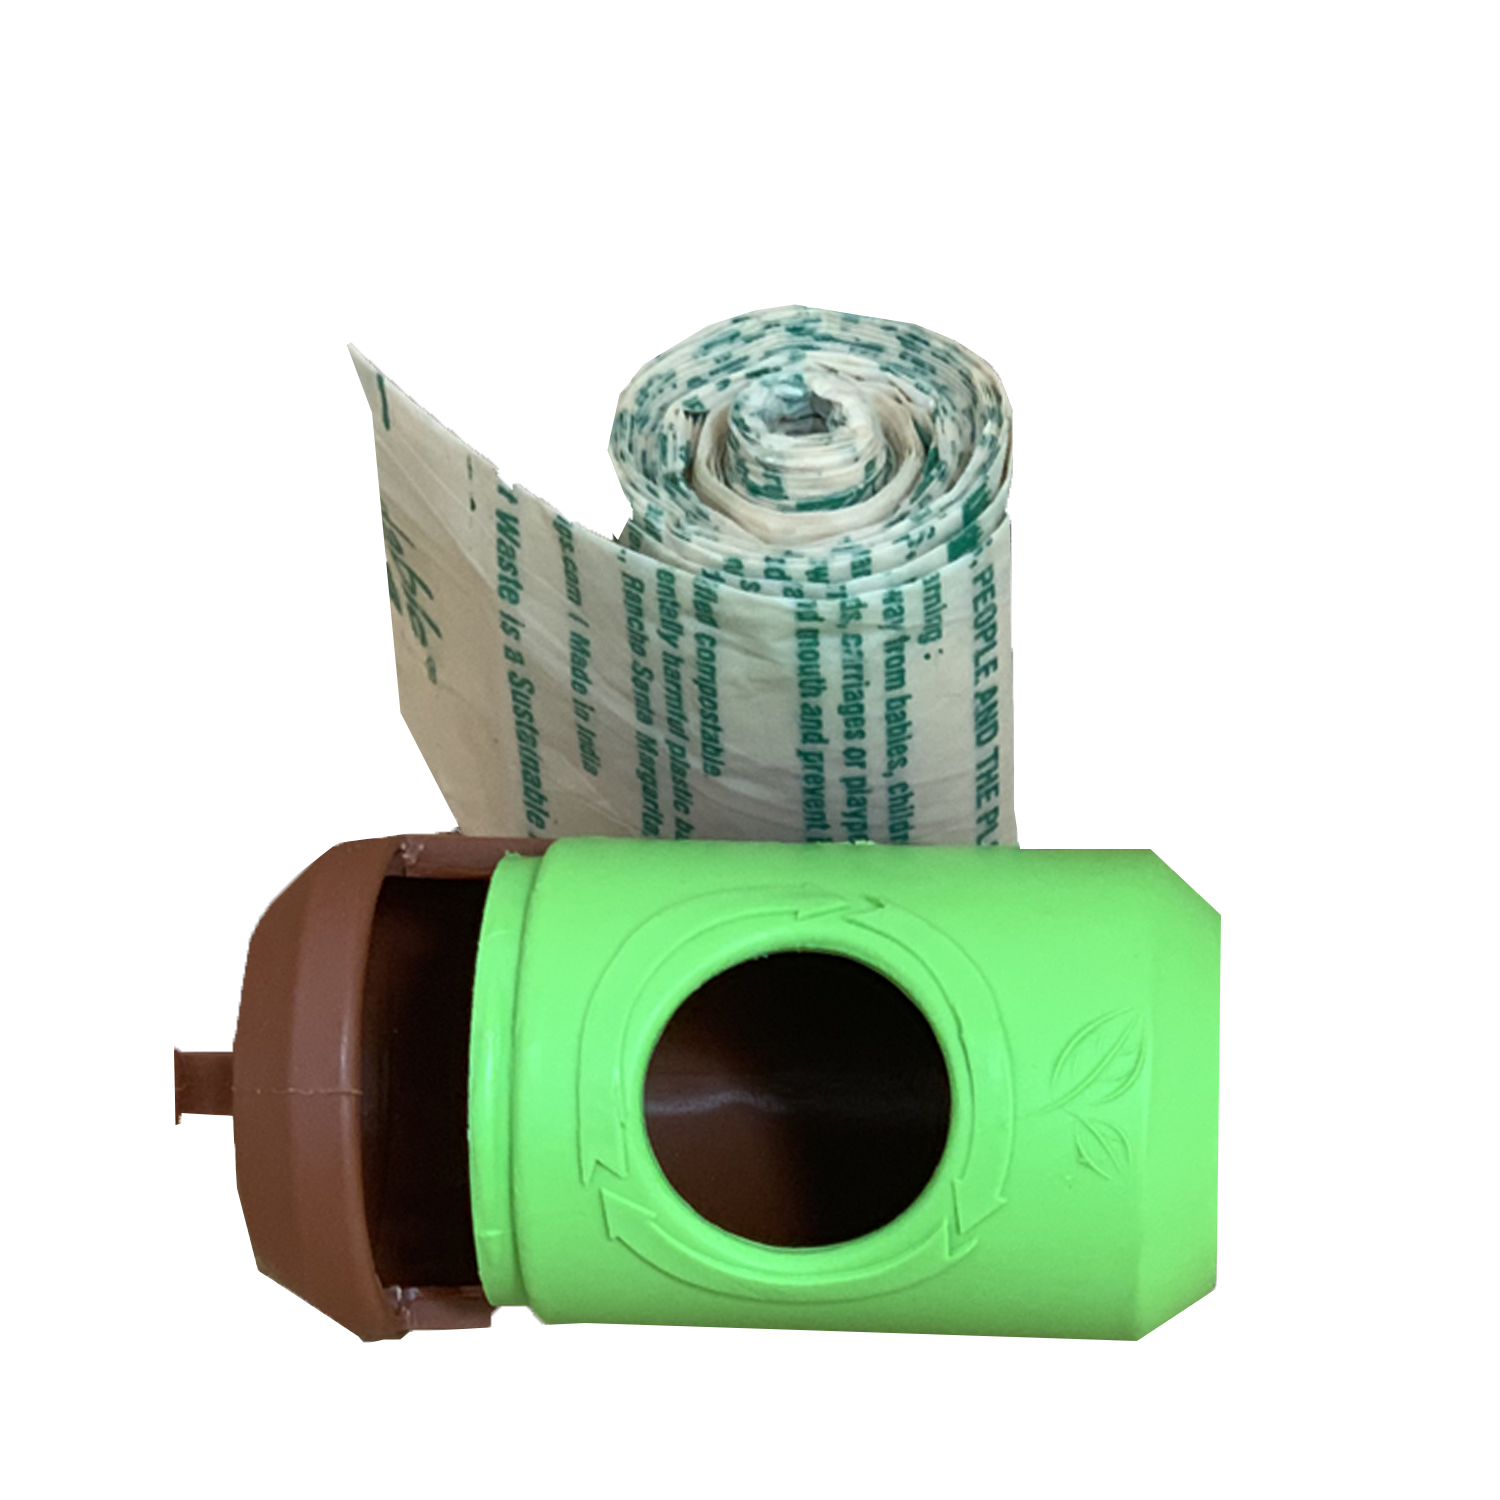 Compostable Dog Waste Bags